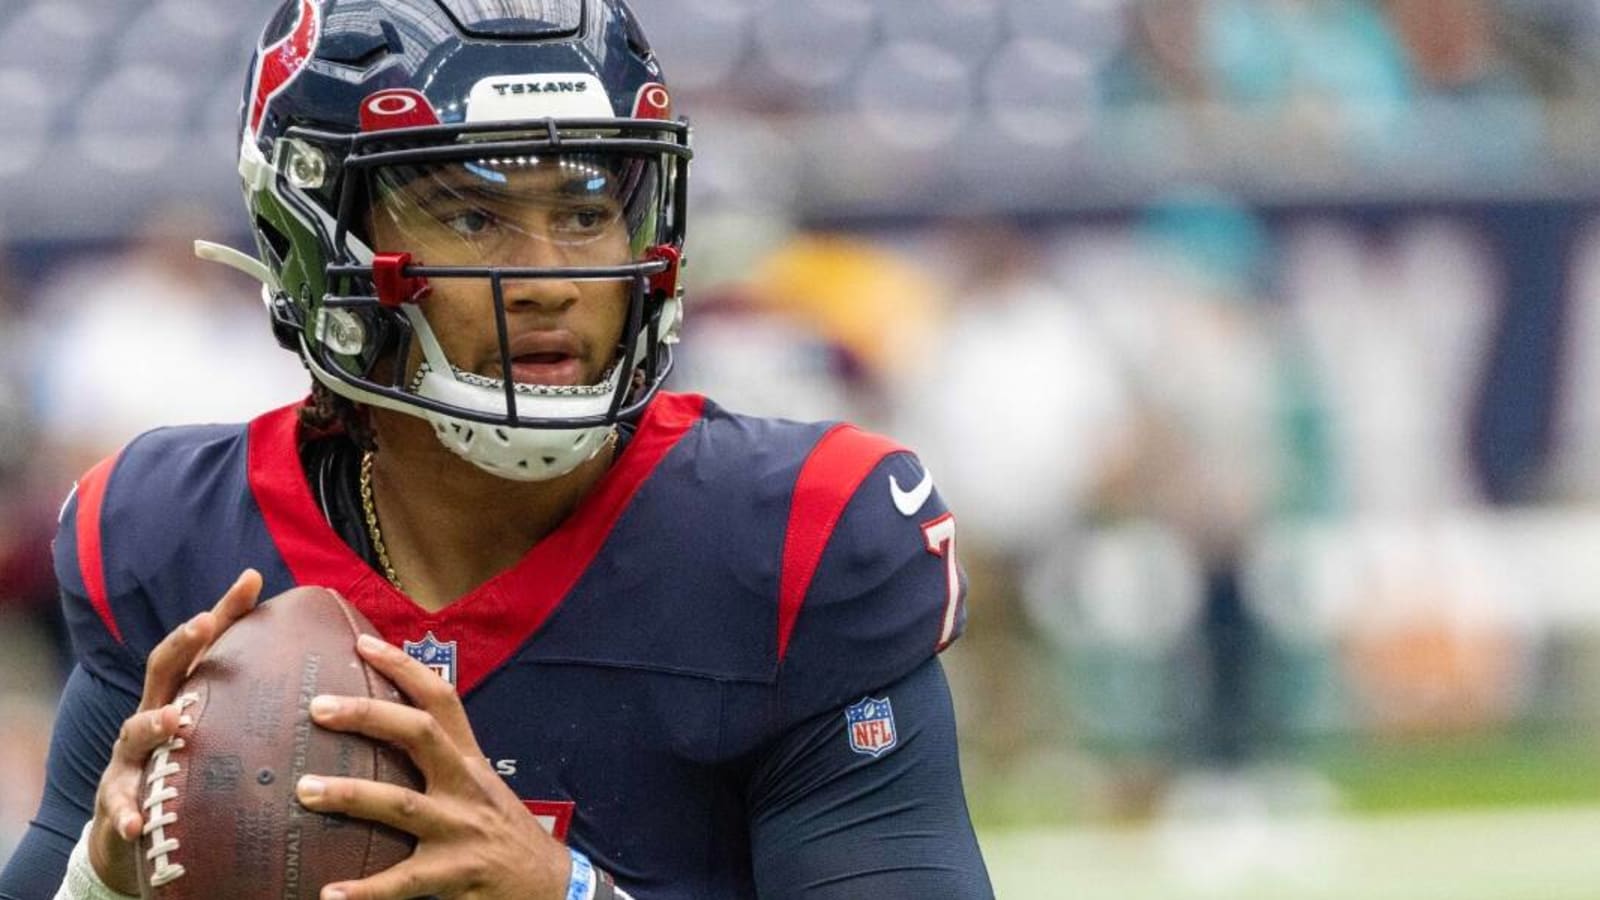 CJ Stroud reacts to being named Texans starting QB